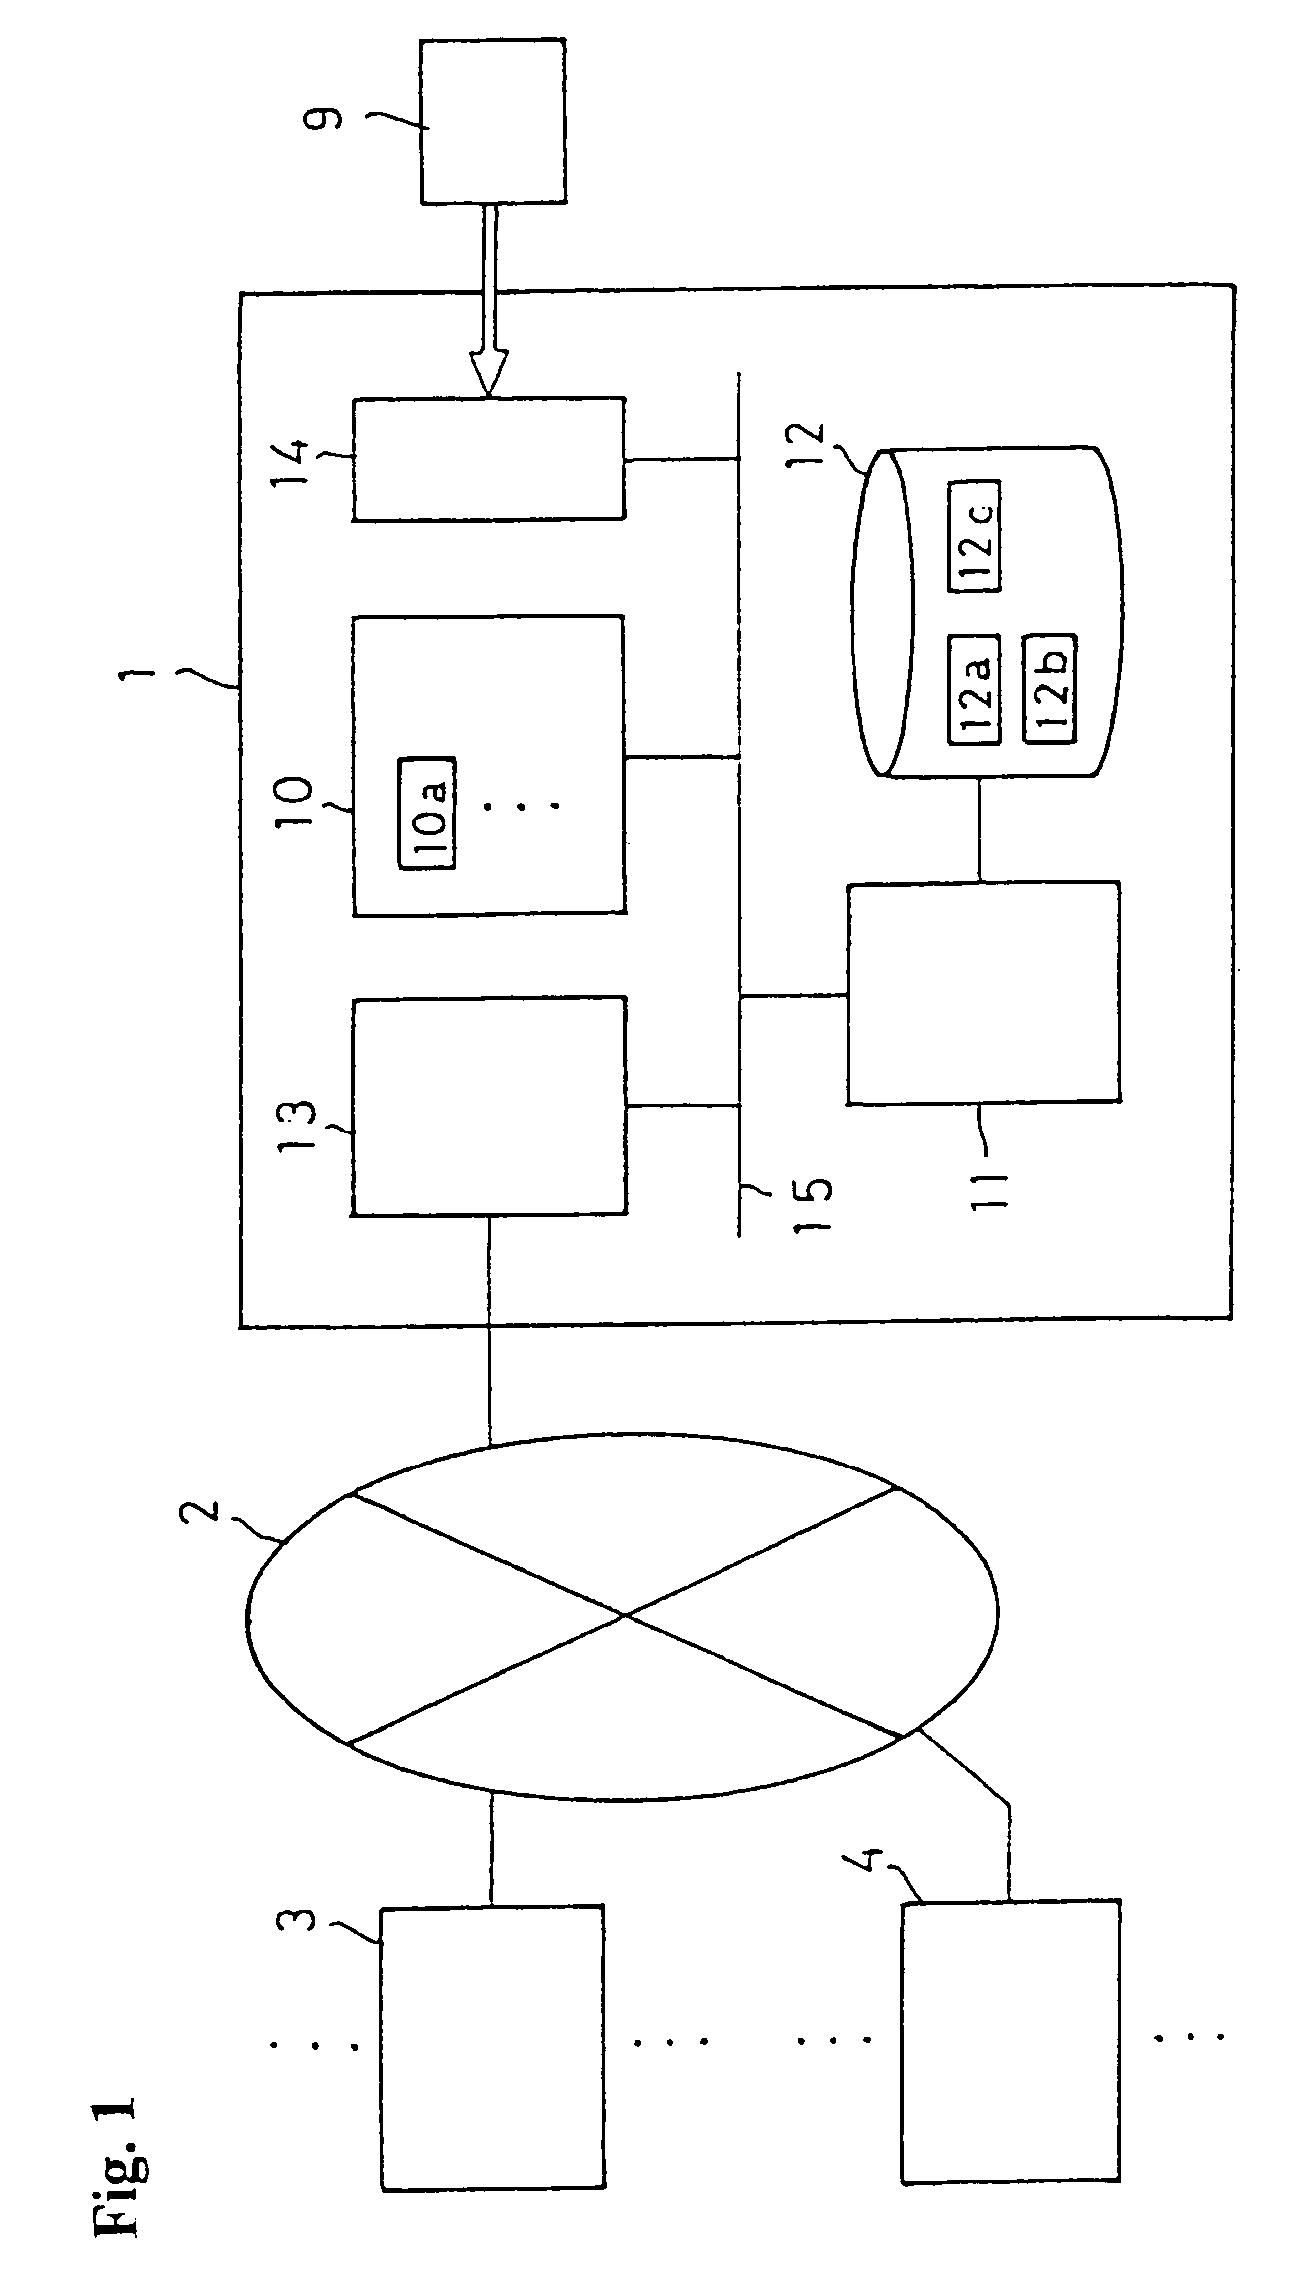 Method of predicting sales based on triple-axis mapping of customer value